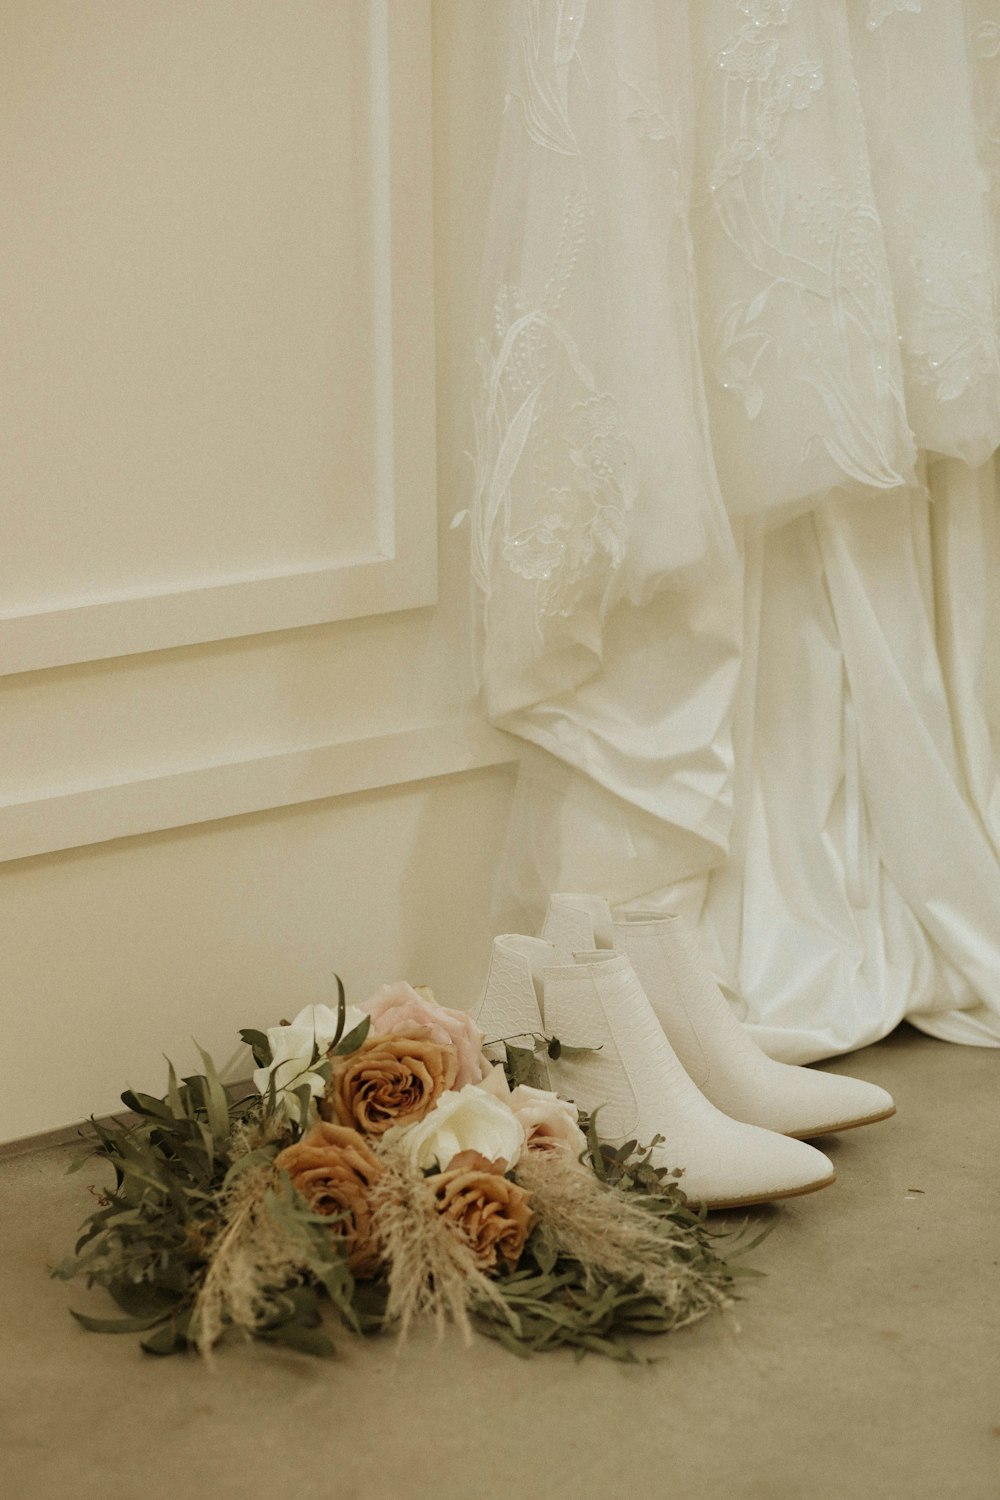 a pair of white shoes next to a bouquet of flowers